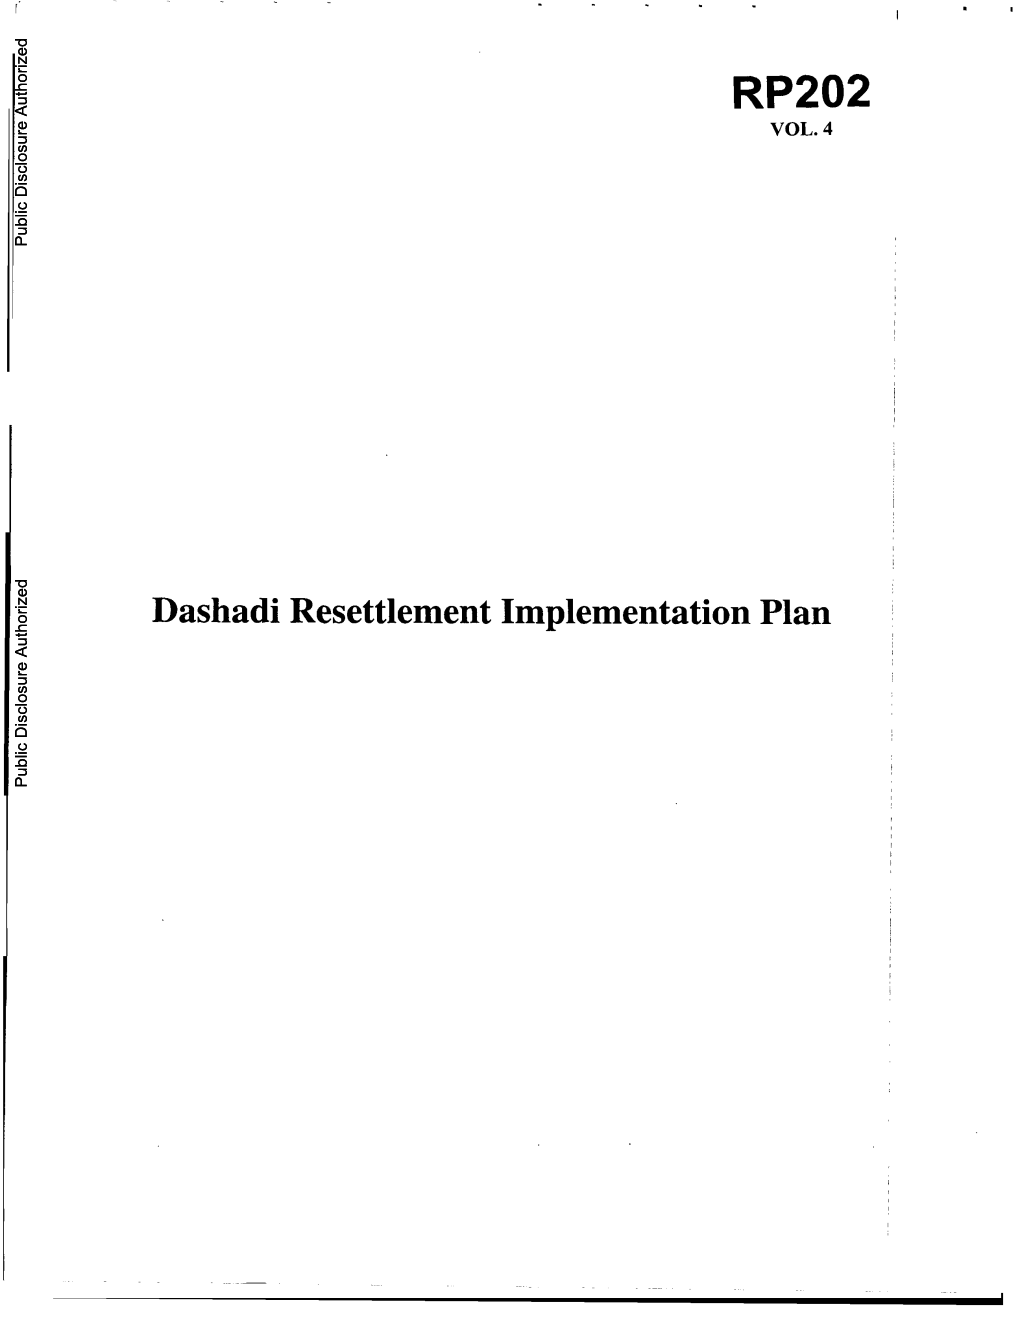 Dashadi Resettlement Implementation Plan Public Disclosure Authorized Public Disclosure Authorized Table of Contents